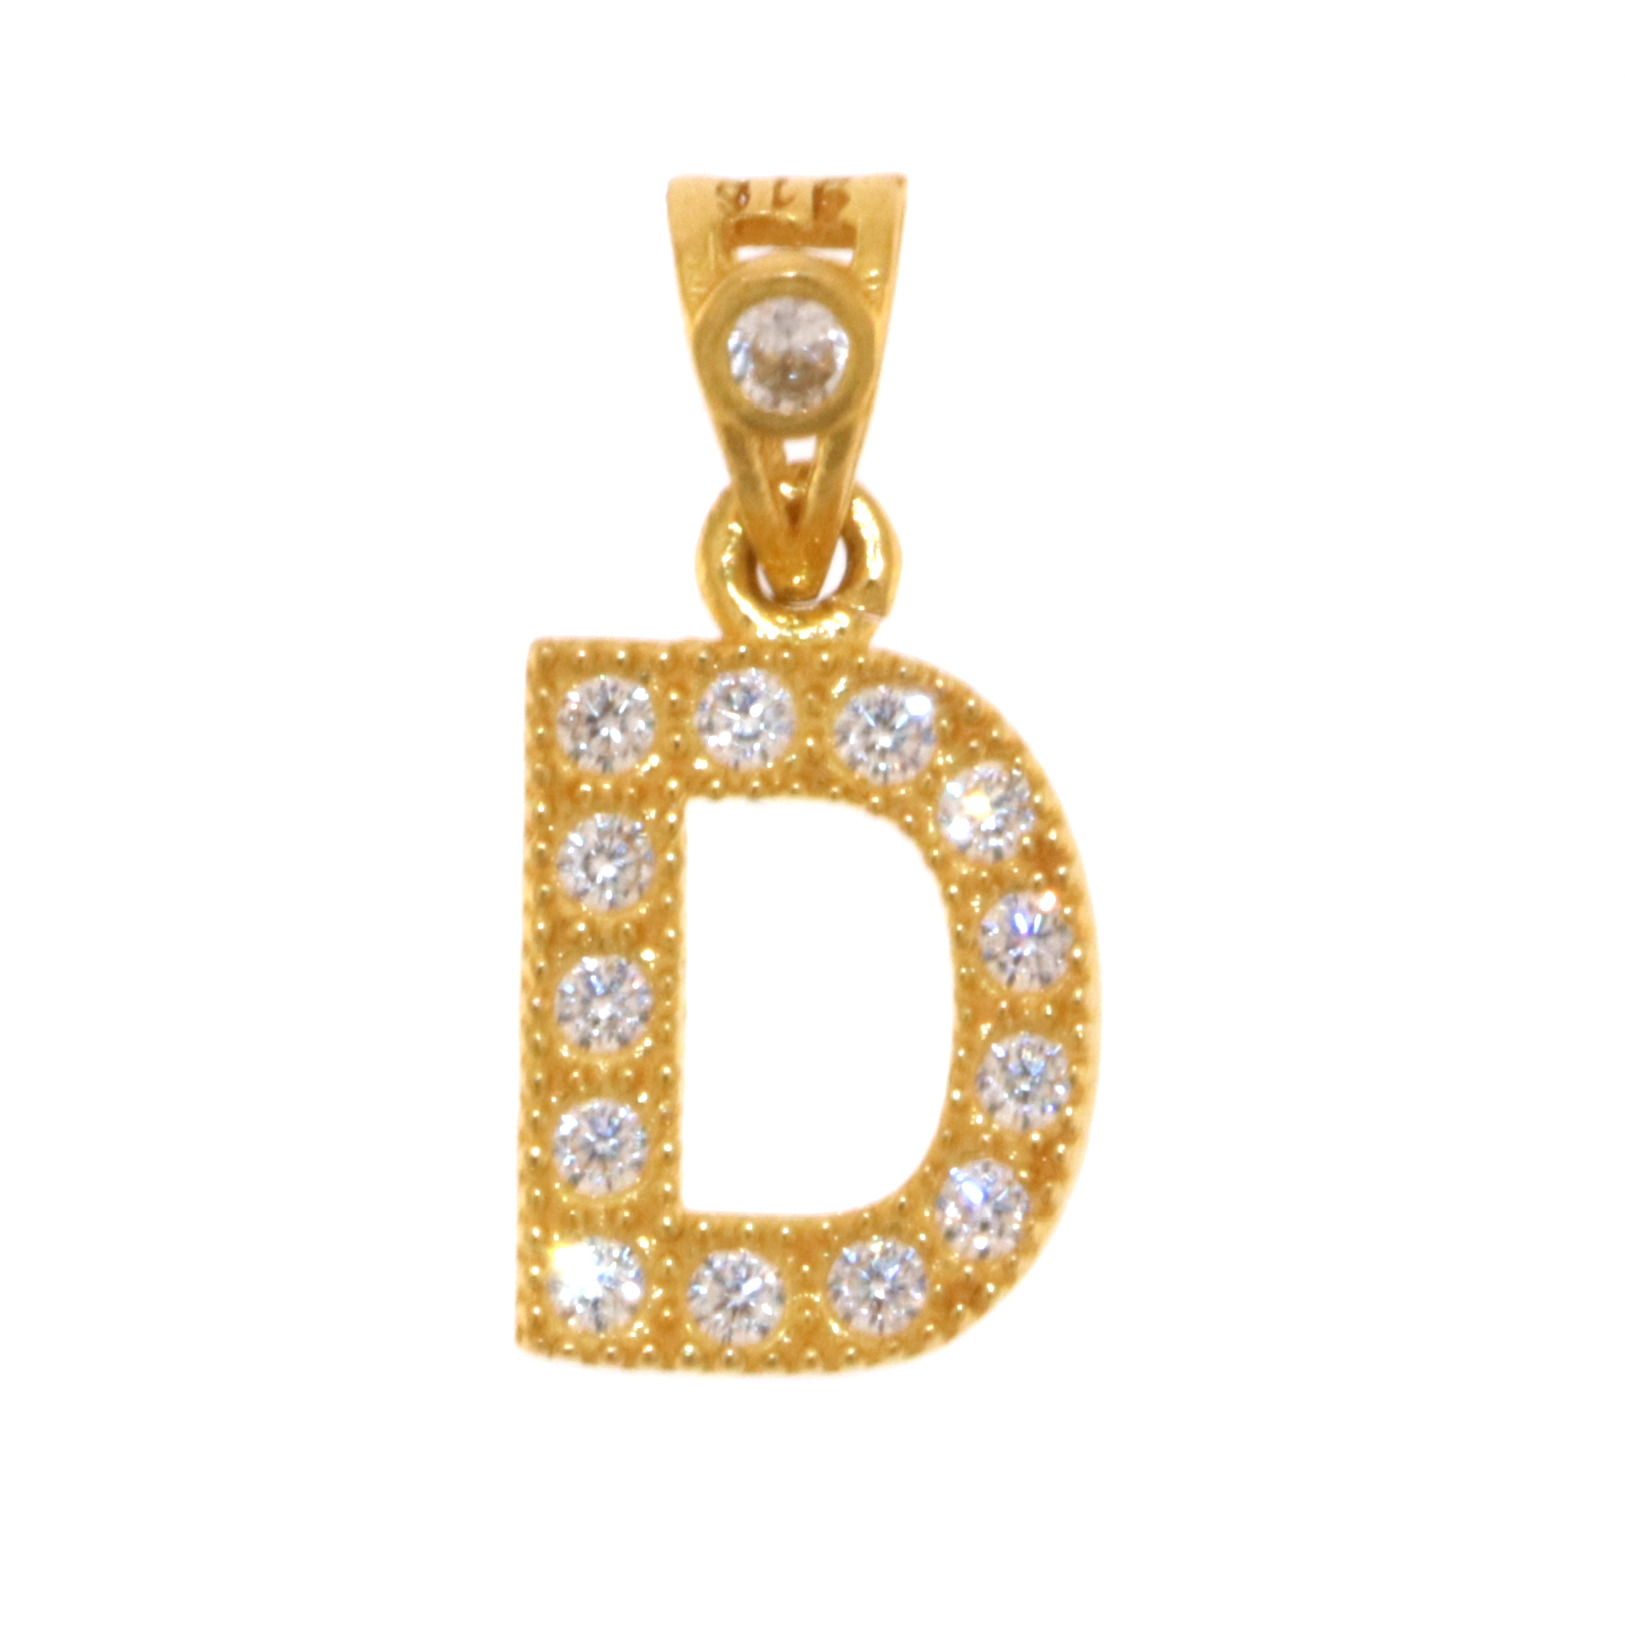 22ct Real Gold Asian/Indian/Pakistani Style 'D' Pendant